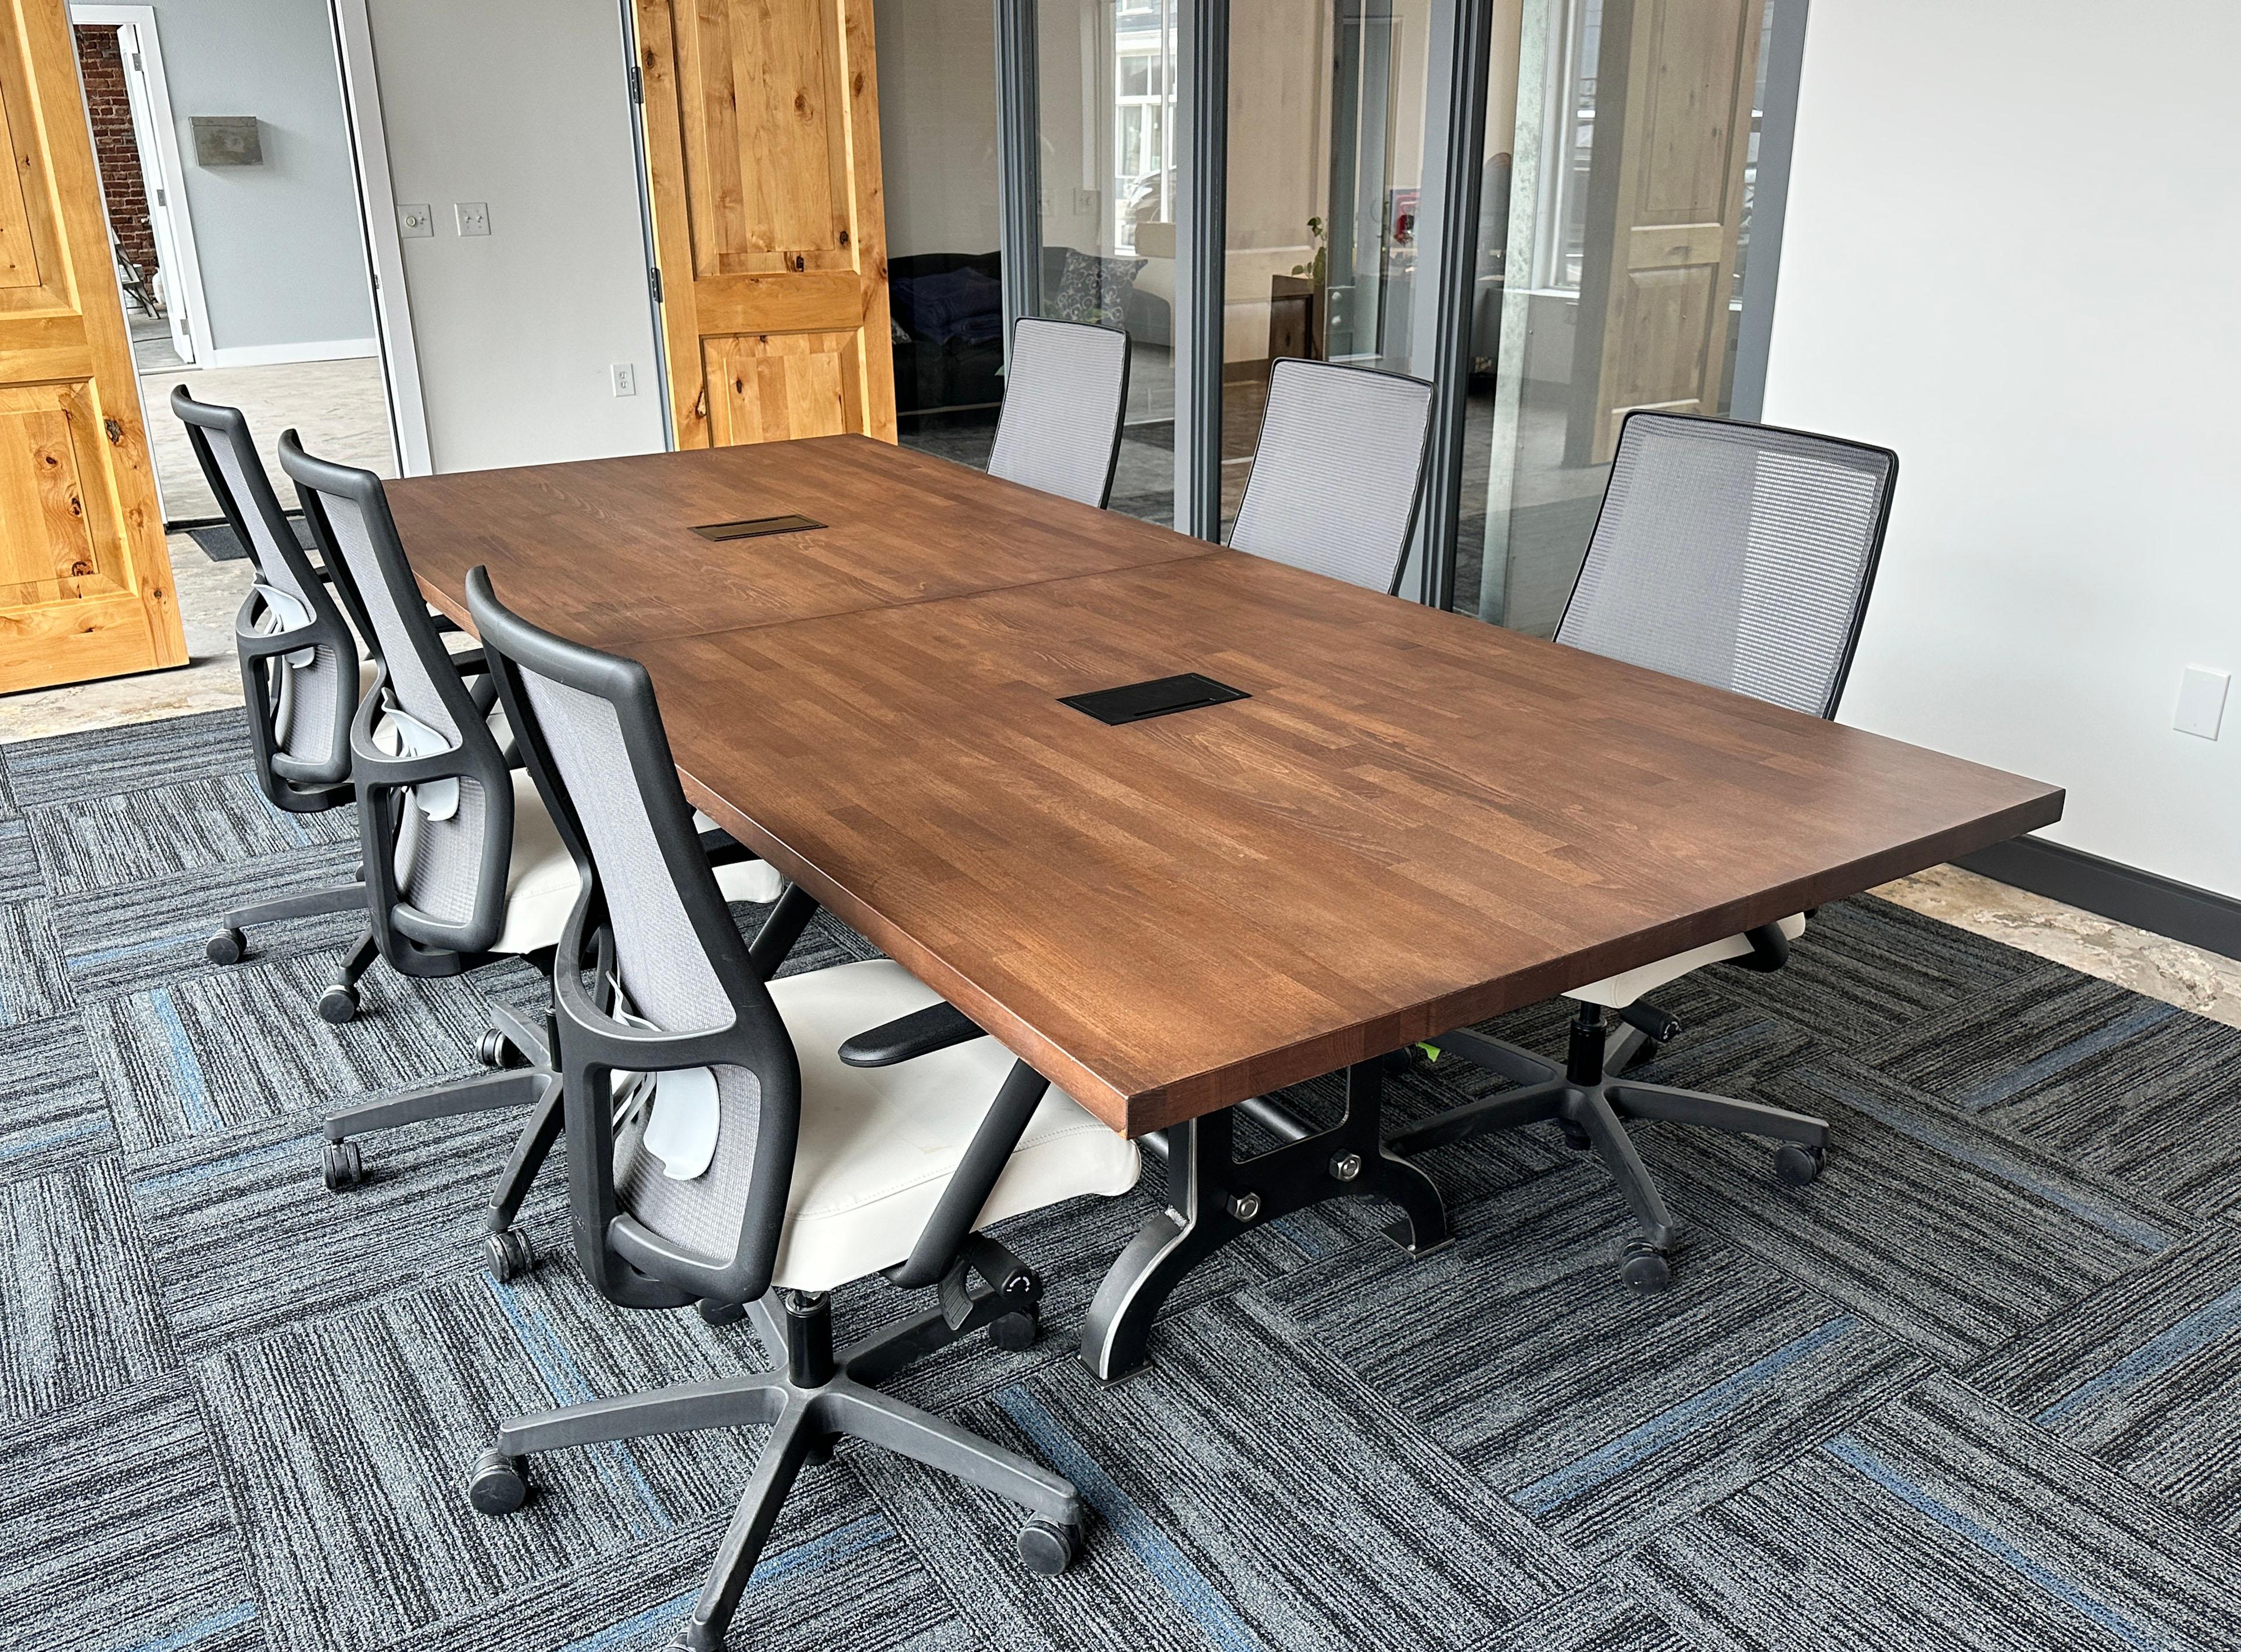 Metalwork 10 foot Industrial Beech Wood conference table For Sale